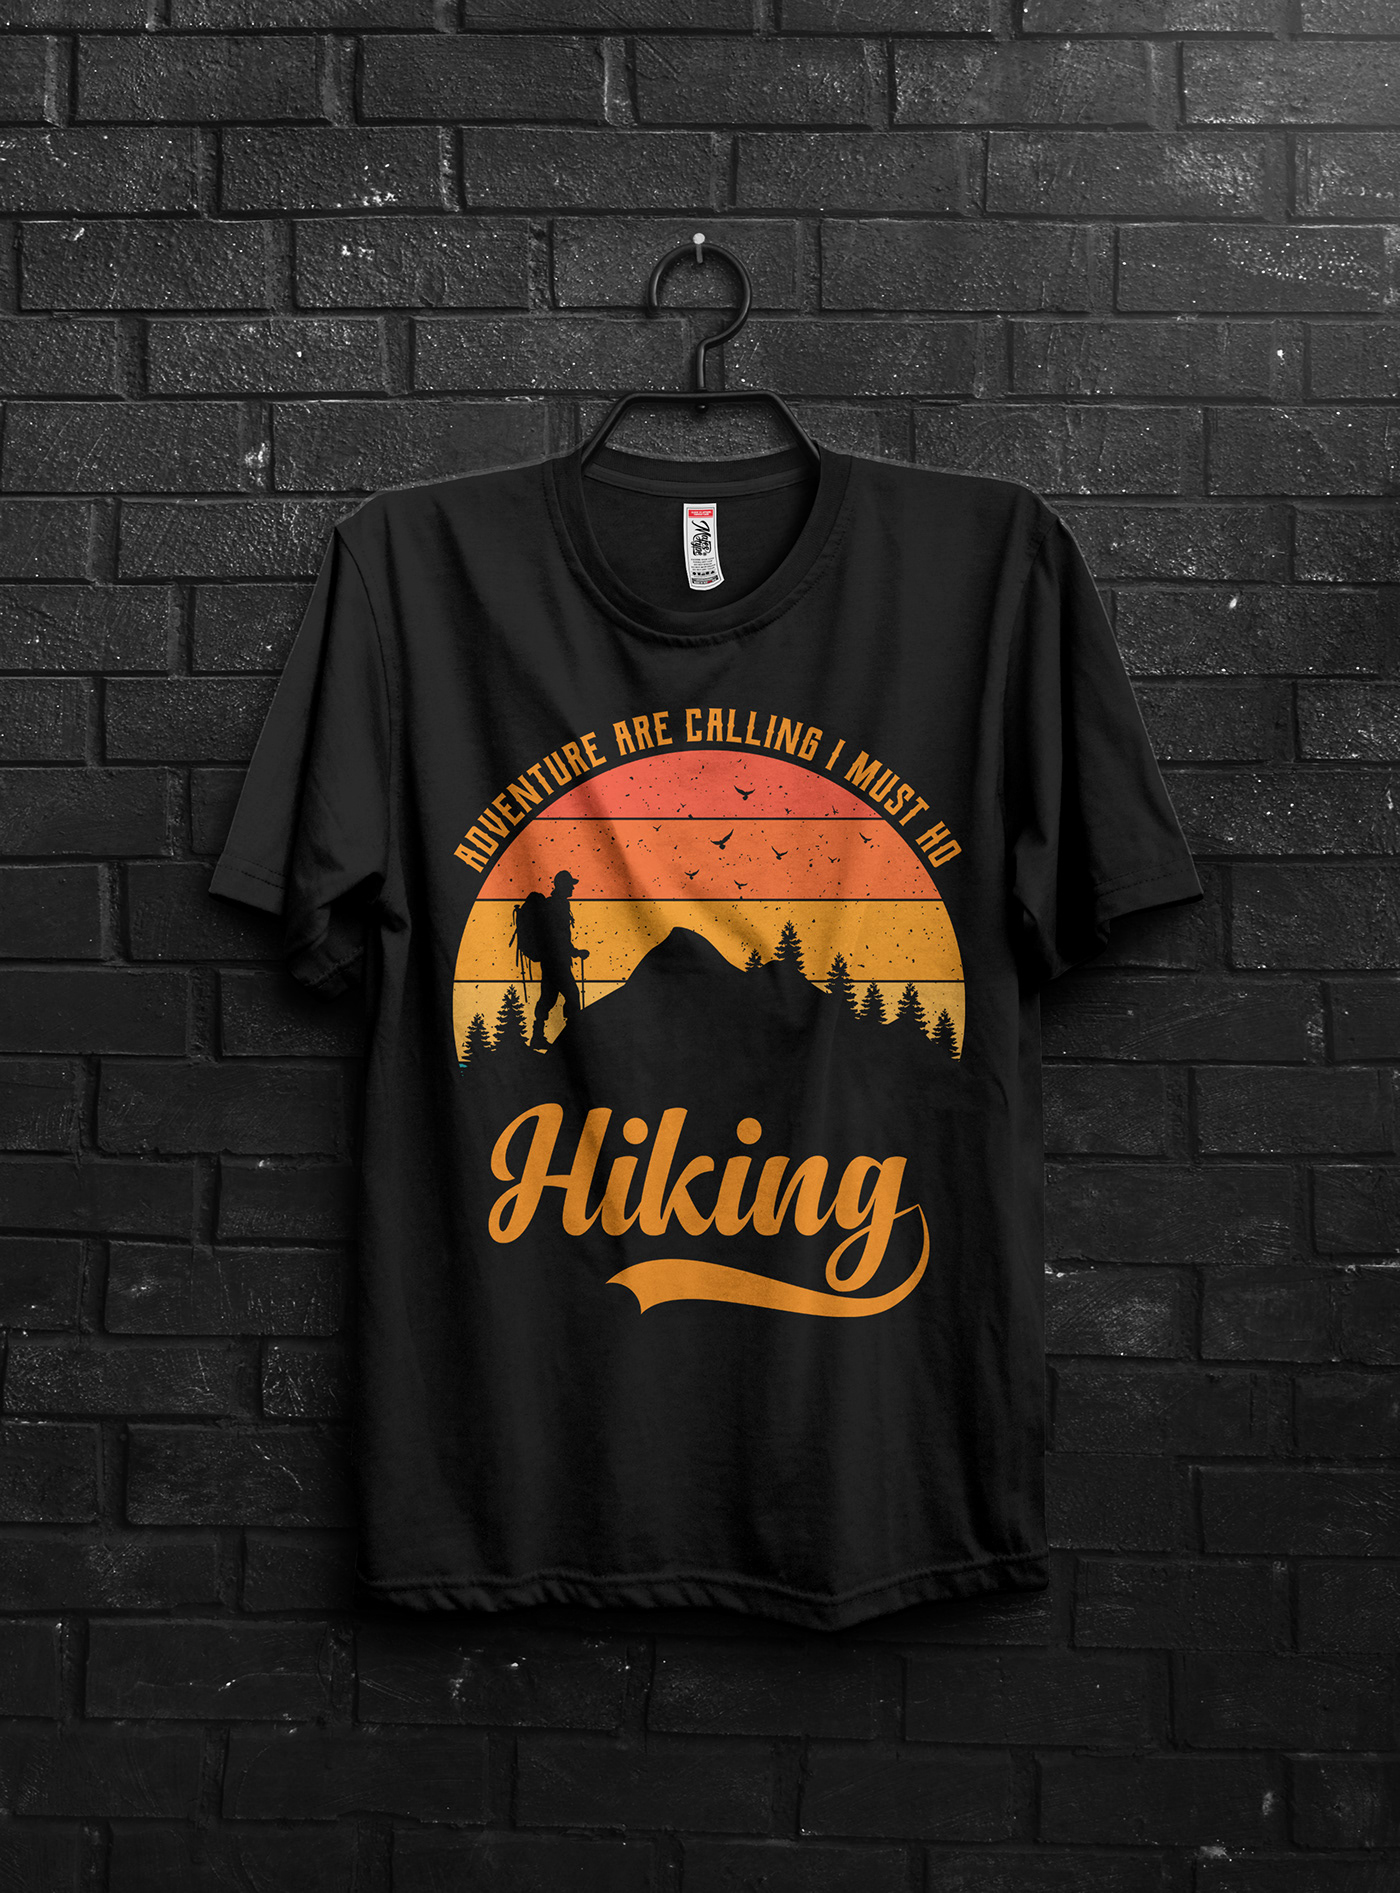 t-shirt Clothing camping adventure hiking outdoors mountains merchandise campaign usa